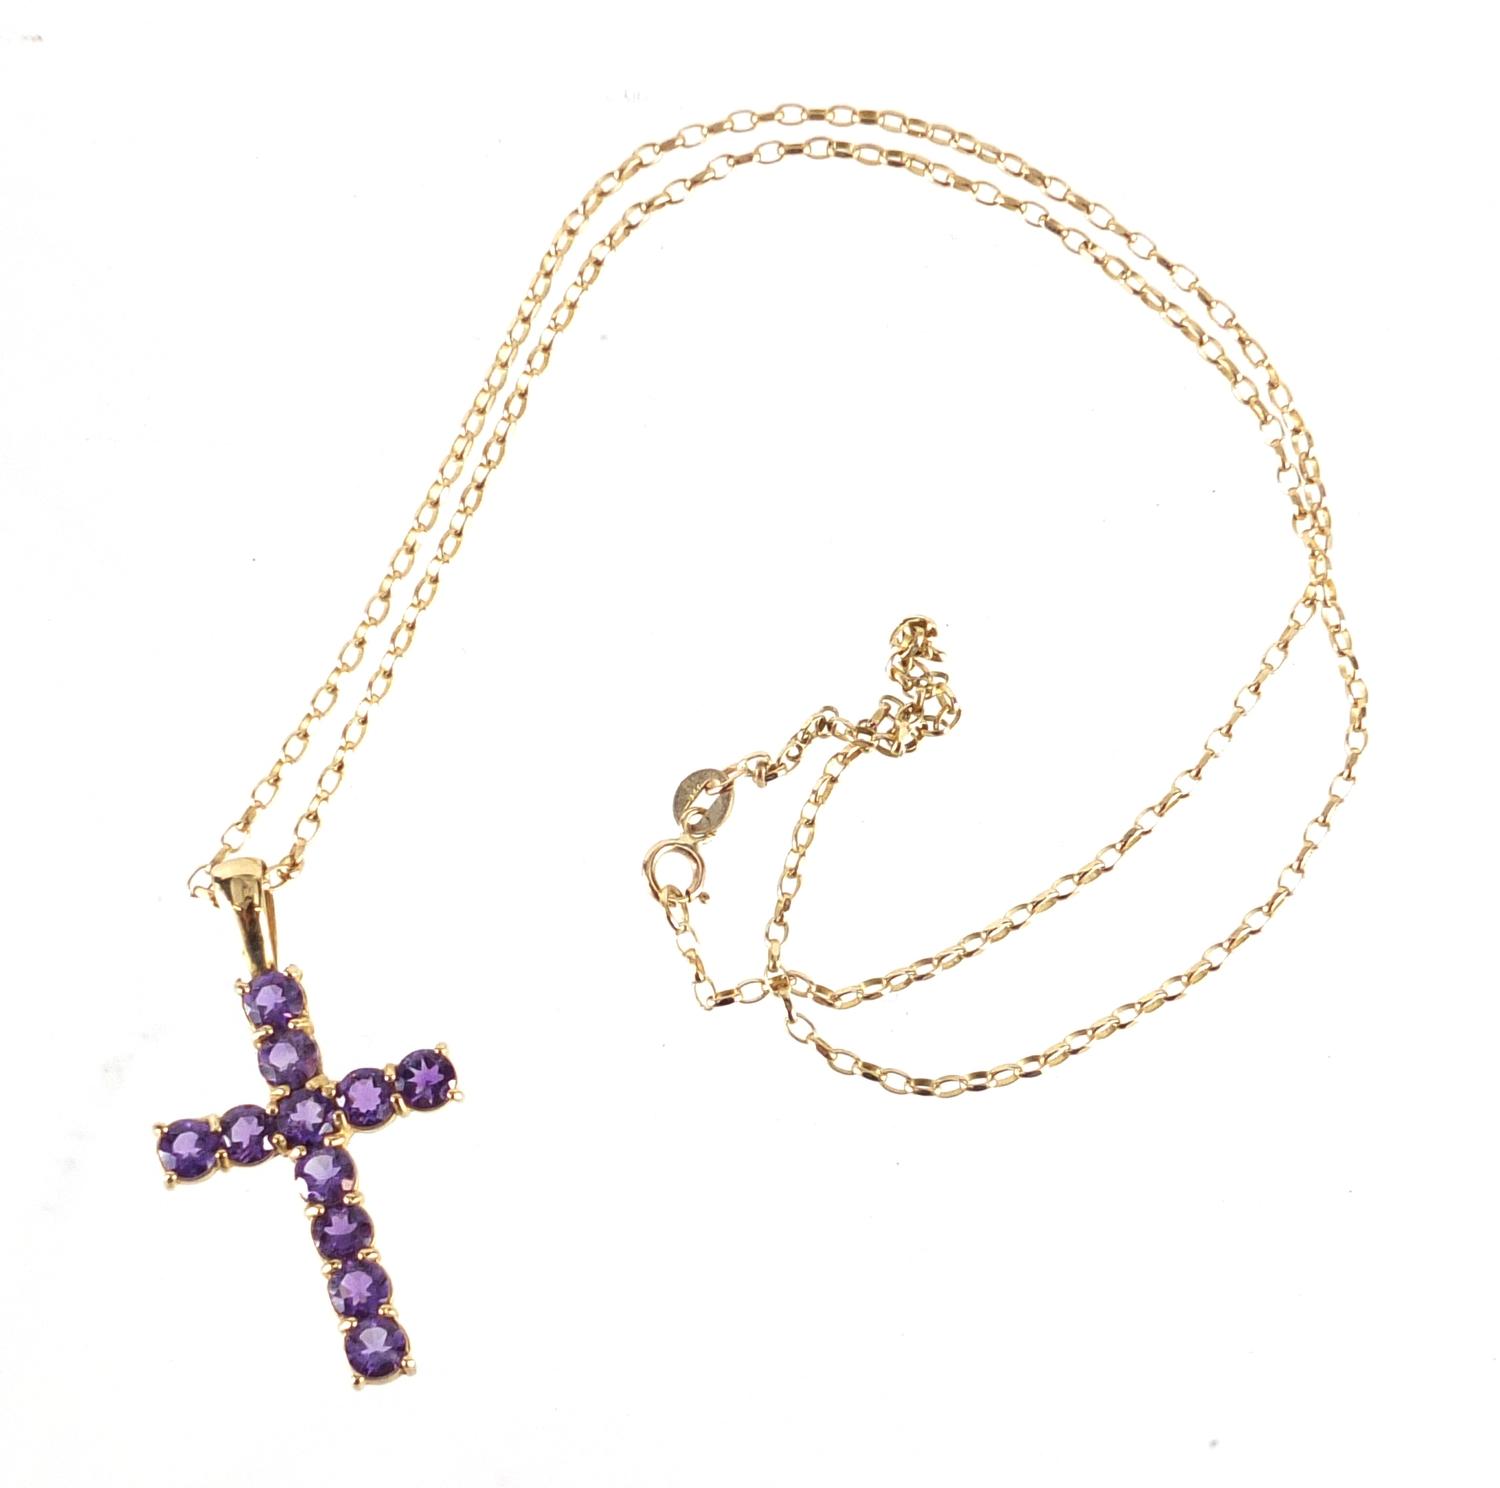 9ct gold amethyst cross pendant on a 9ct gold necklace, the pendant 3.6cm in length, approximate - Image 2 of 3